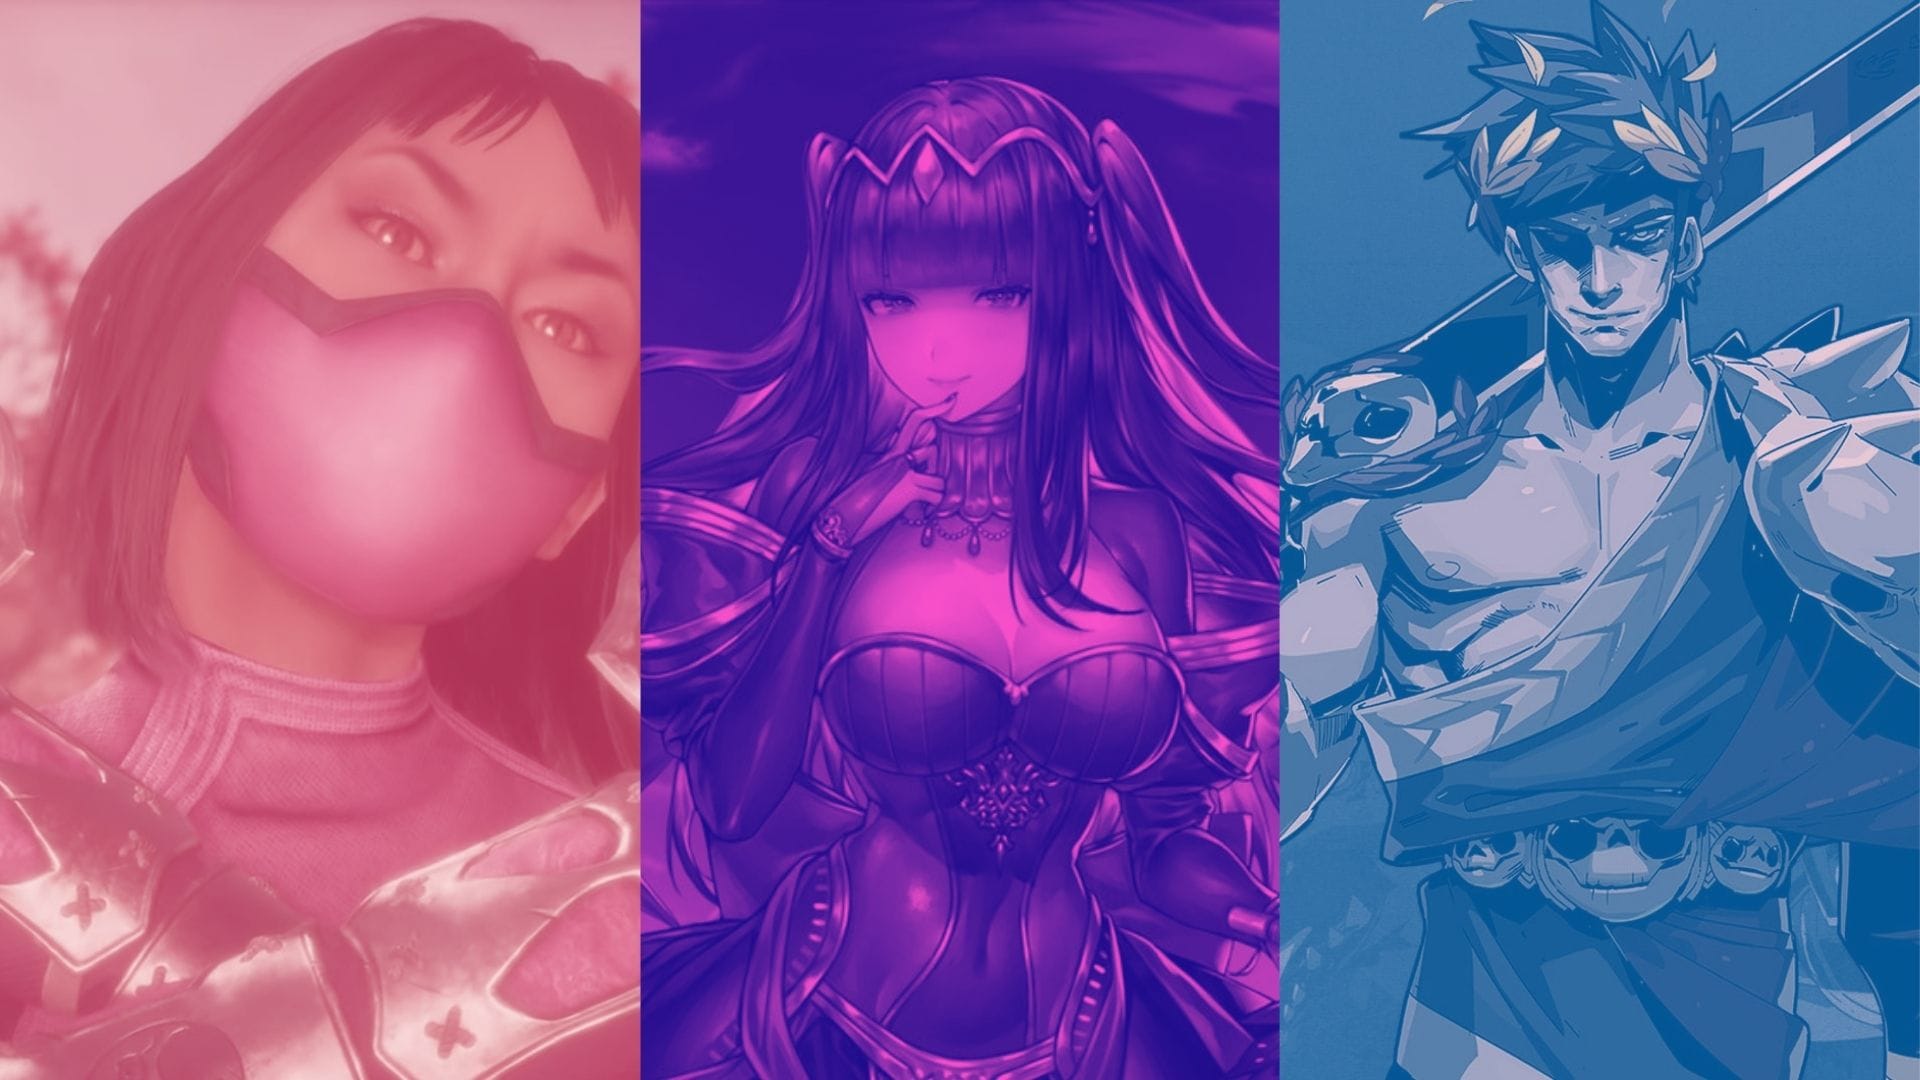 Three Bisexual characters: Mileena from Mortal Kombat, Tharja from Fire Emblem, and Zagreus from Hades